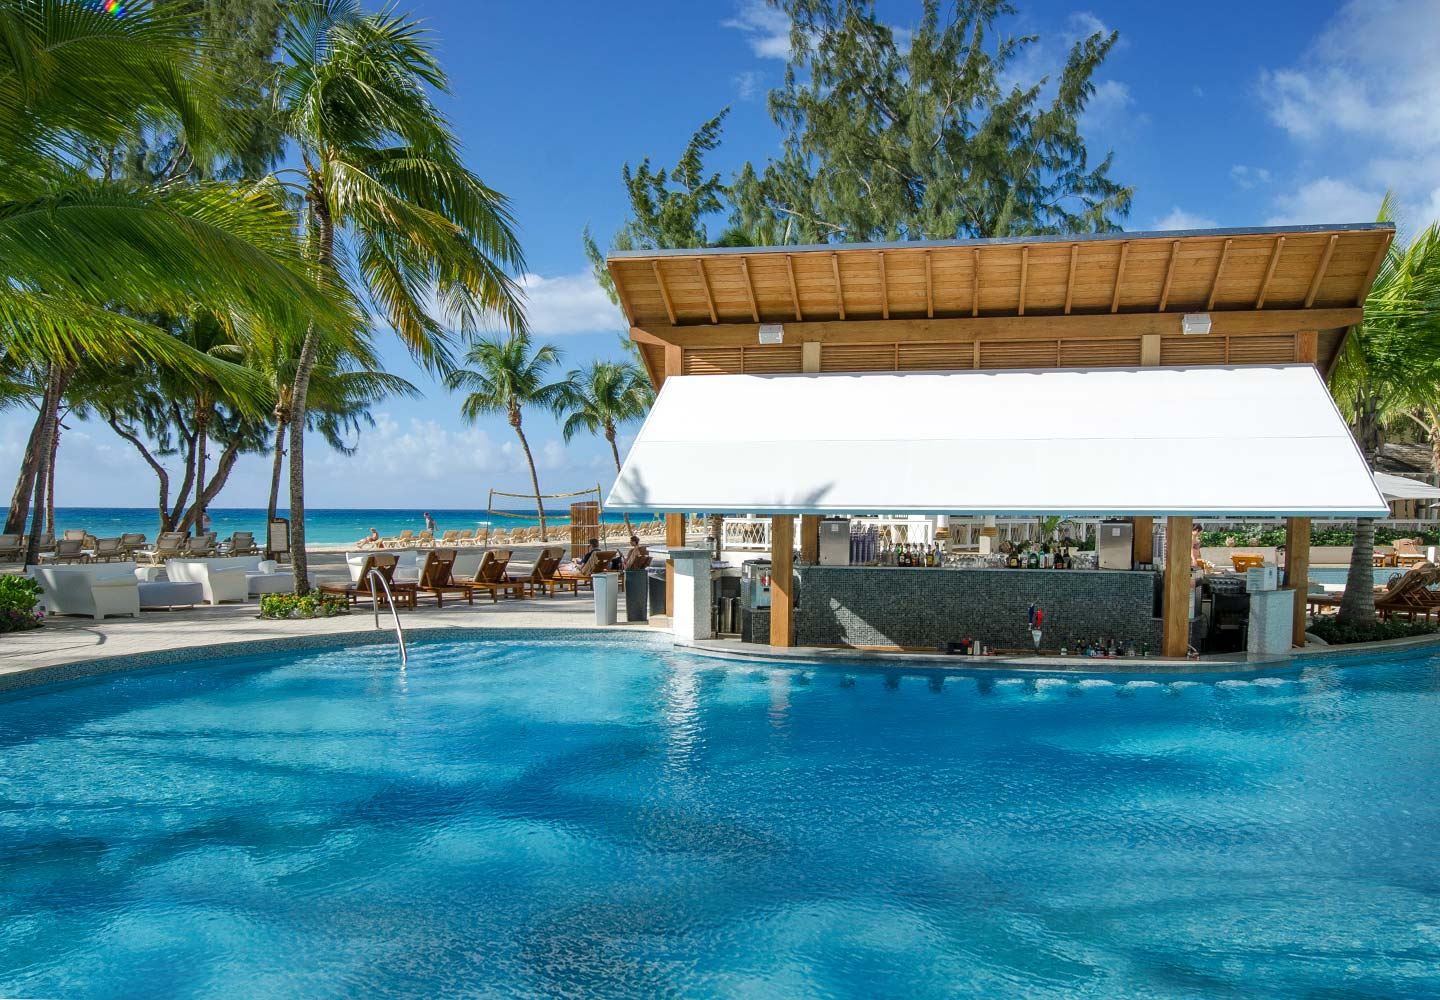 Sandals Resorts Officially Opens Newest Property in Barbados